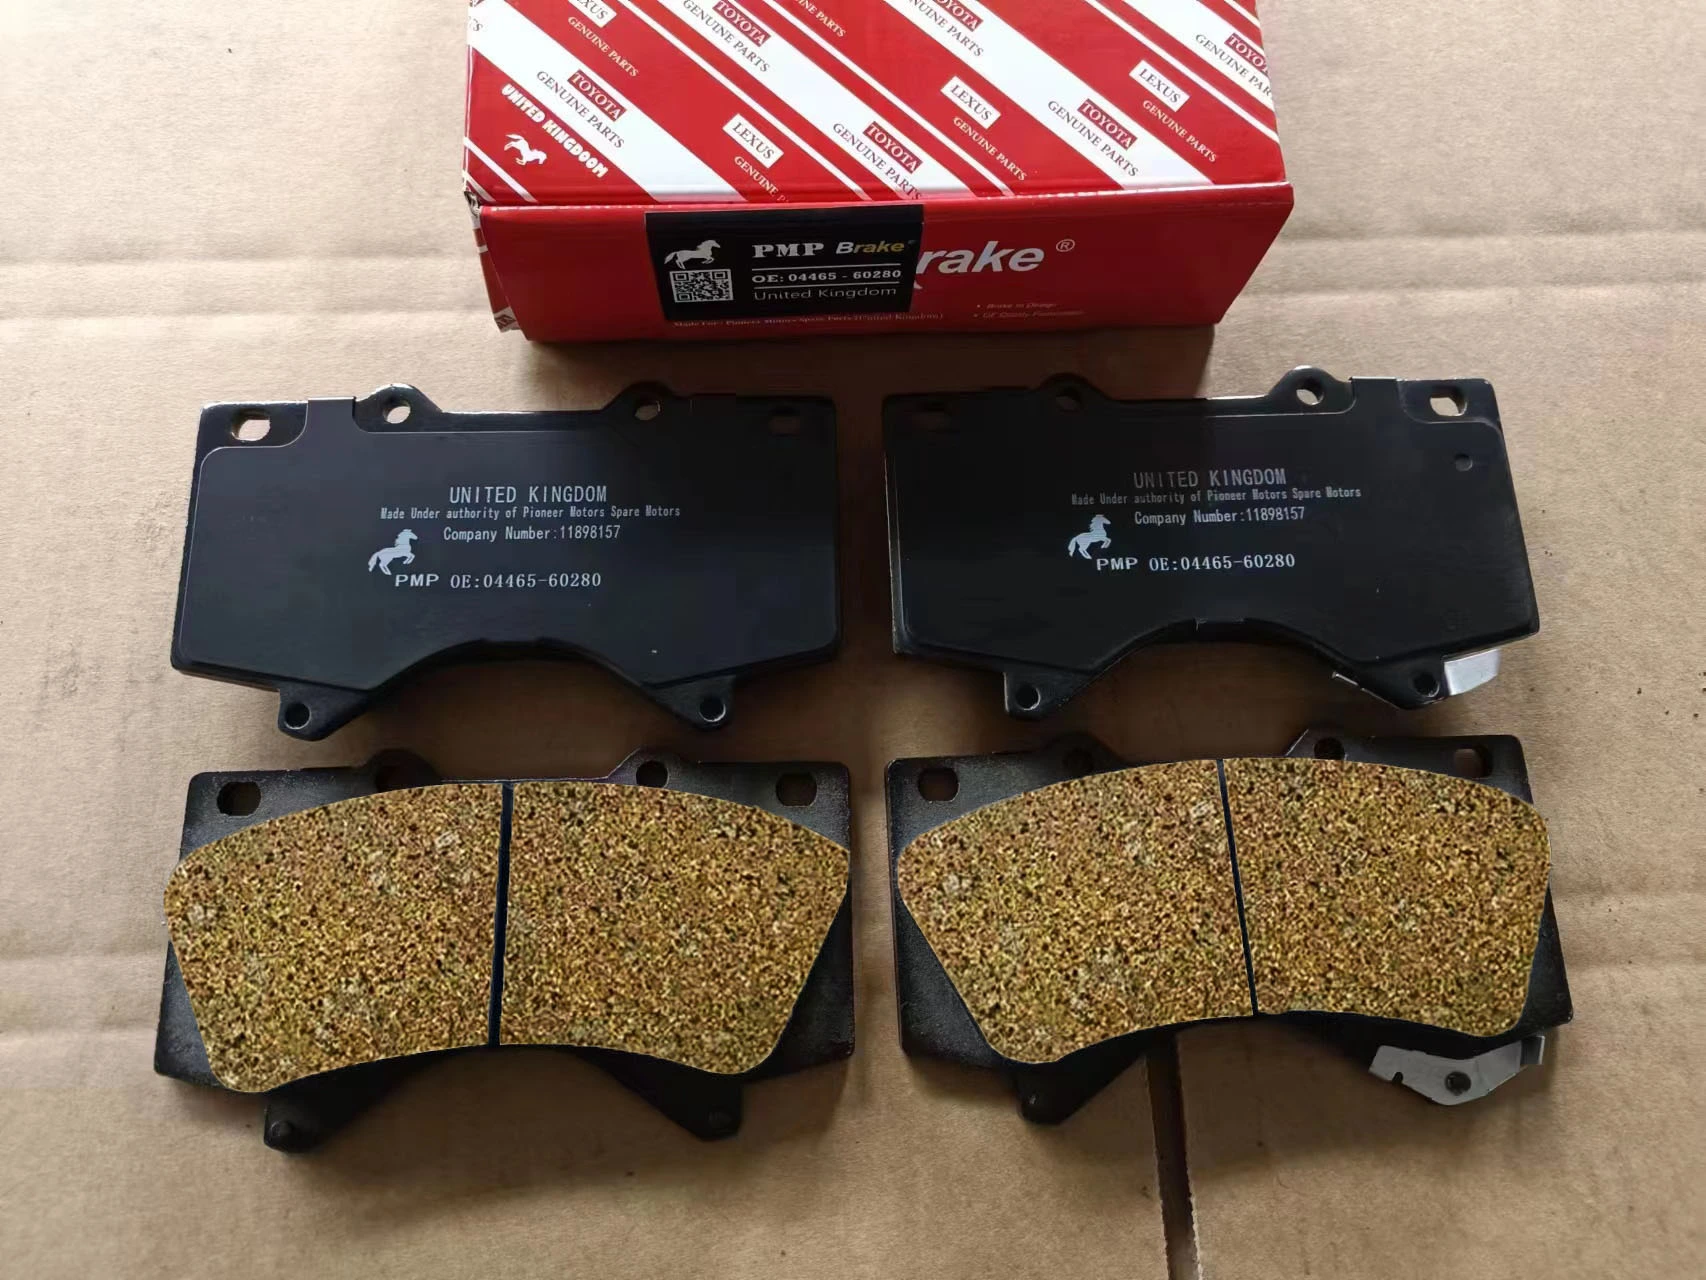  Brake pads for Toyota Corolla, semi metallic material, durable and reliable for safe braking.